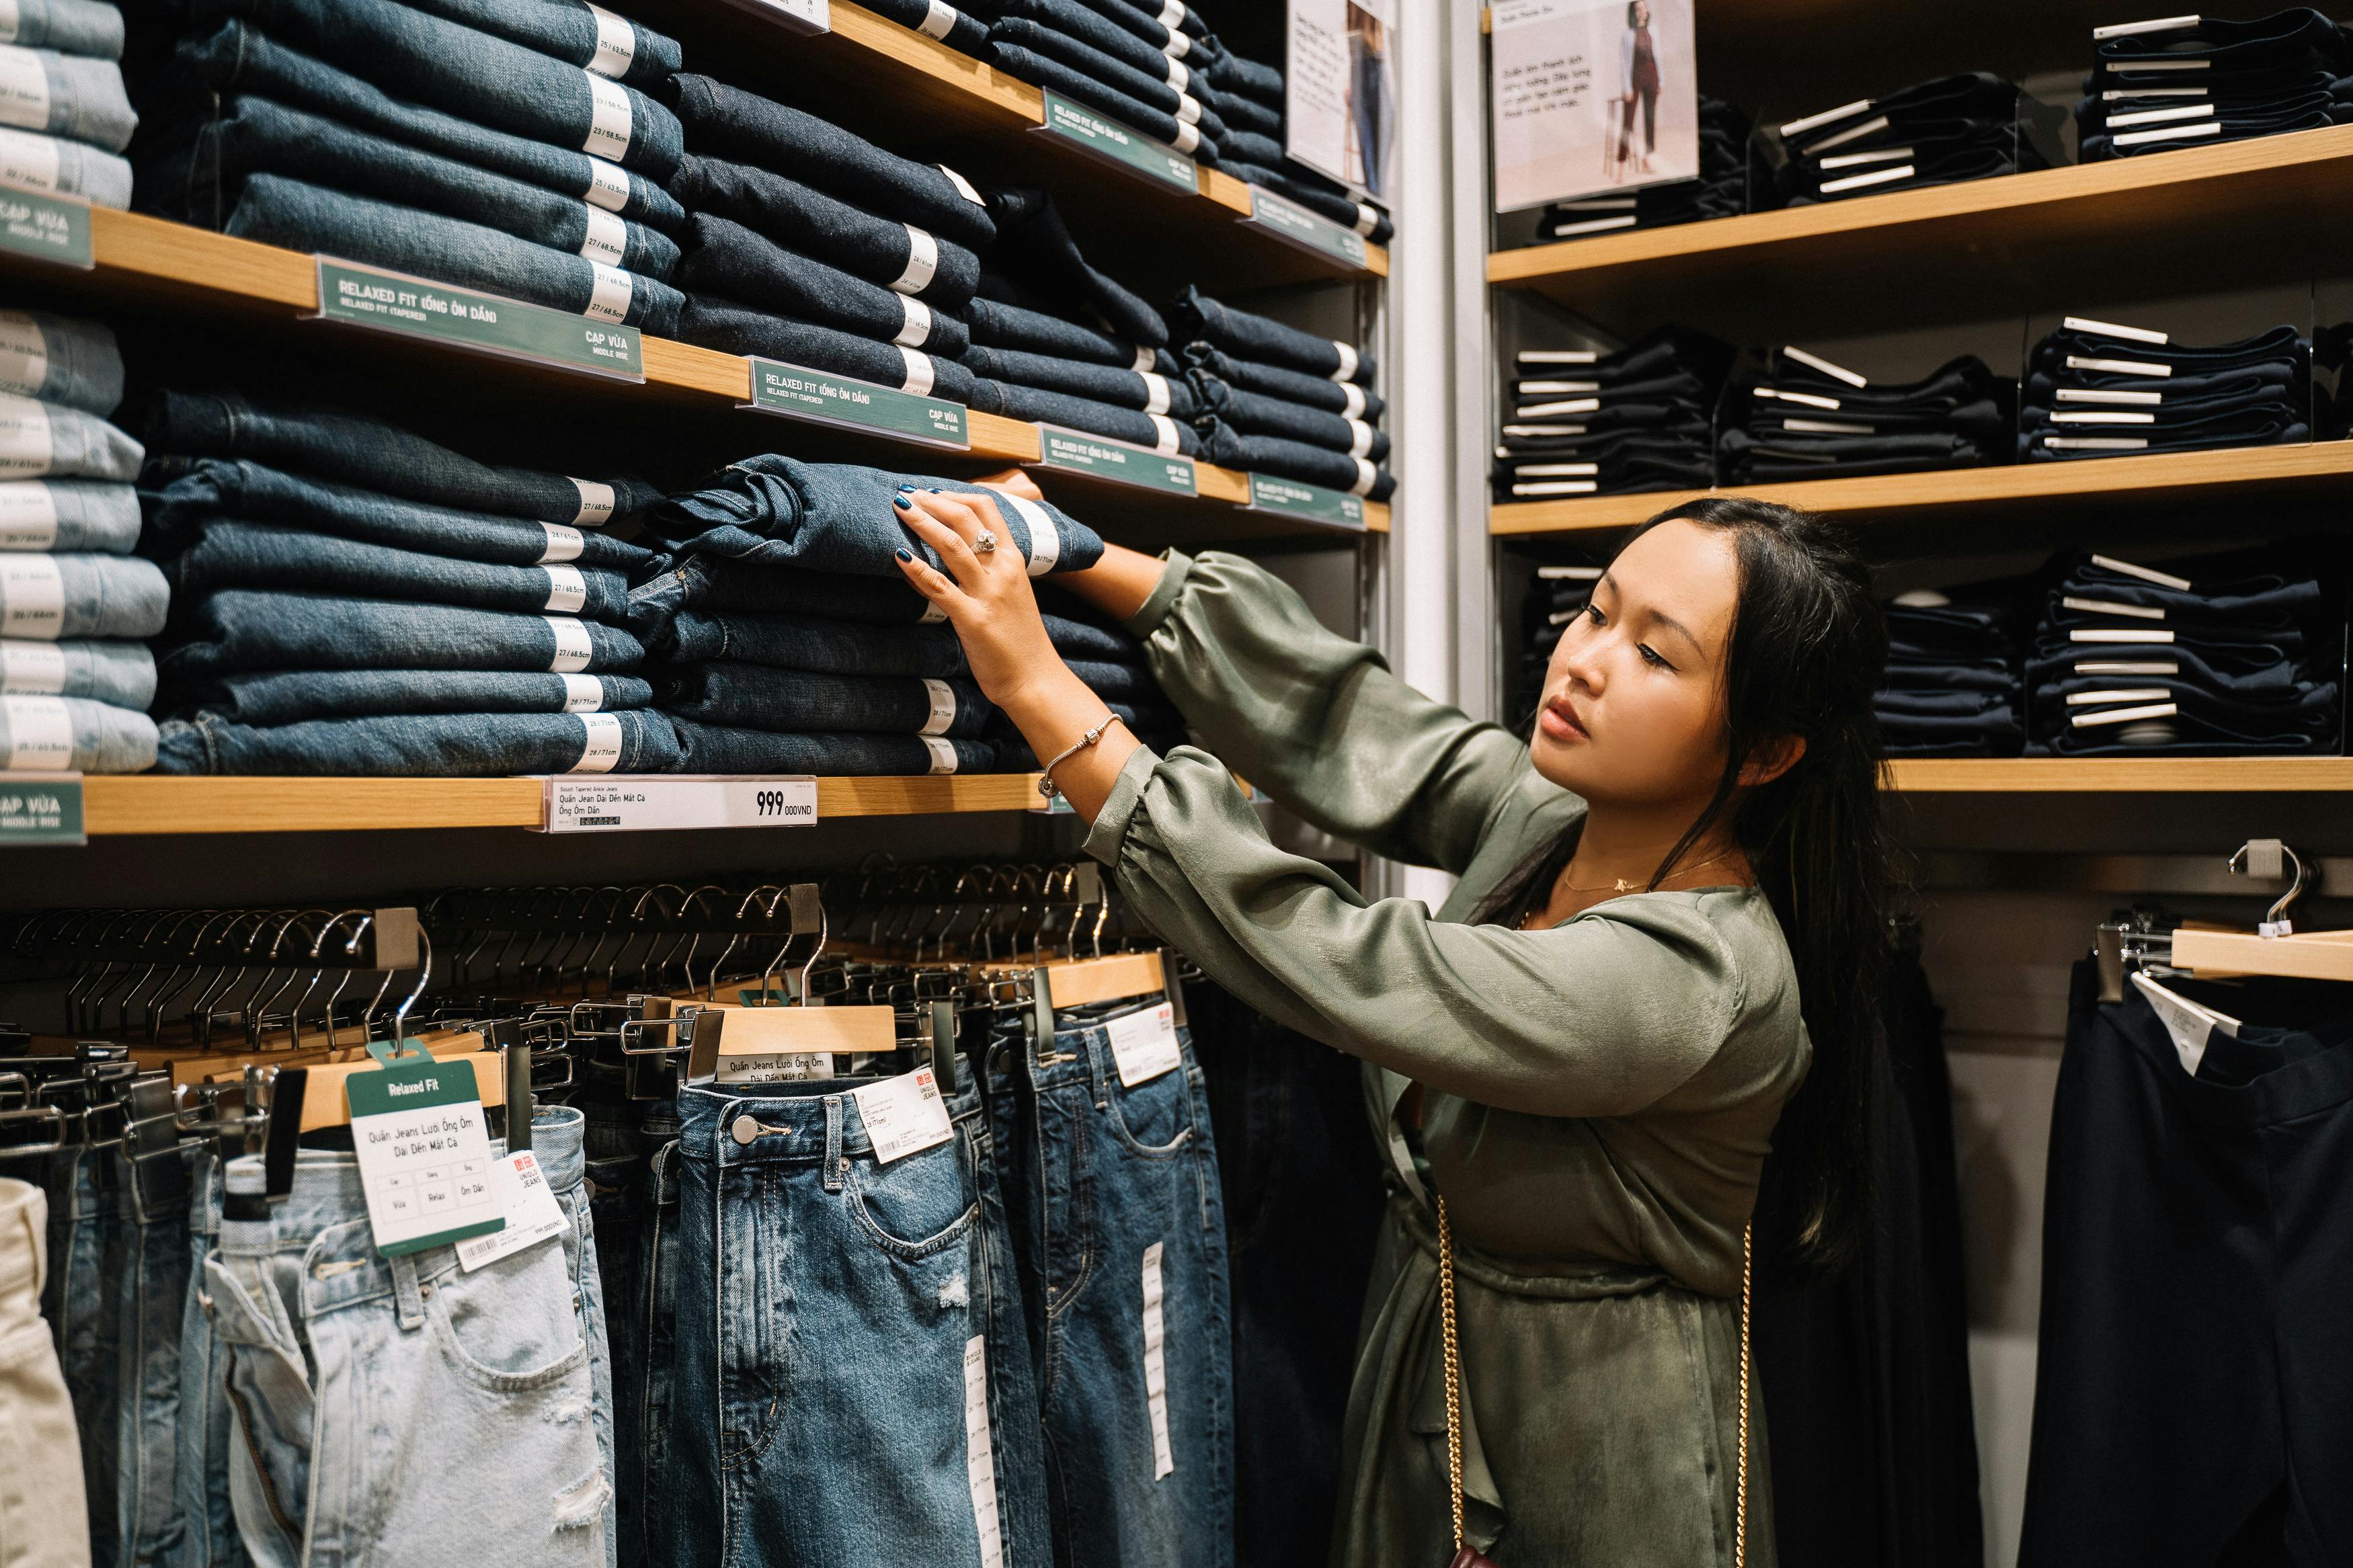 woman looking at the jeans on a wooden shelf